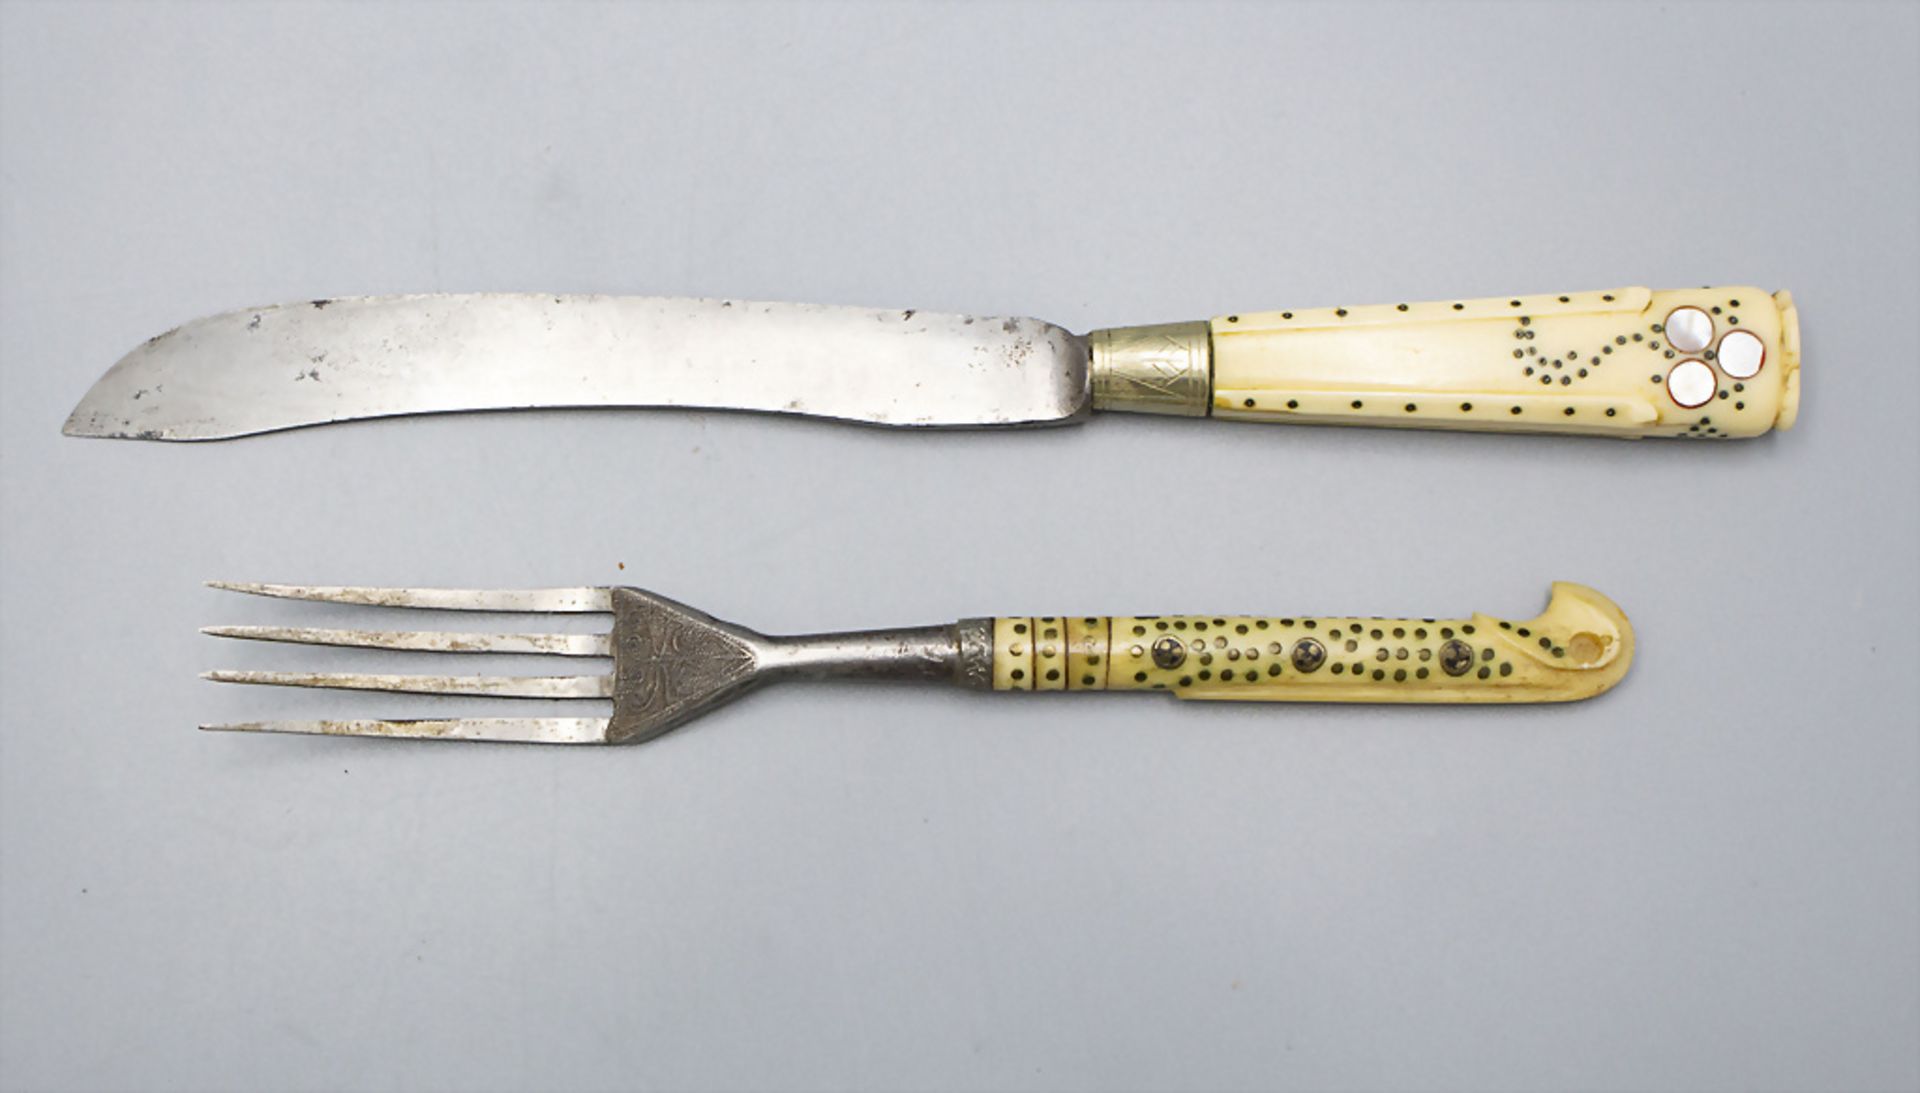 Barock Besteck / A Baroque fork and knife, 18. Jh.